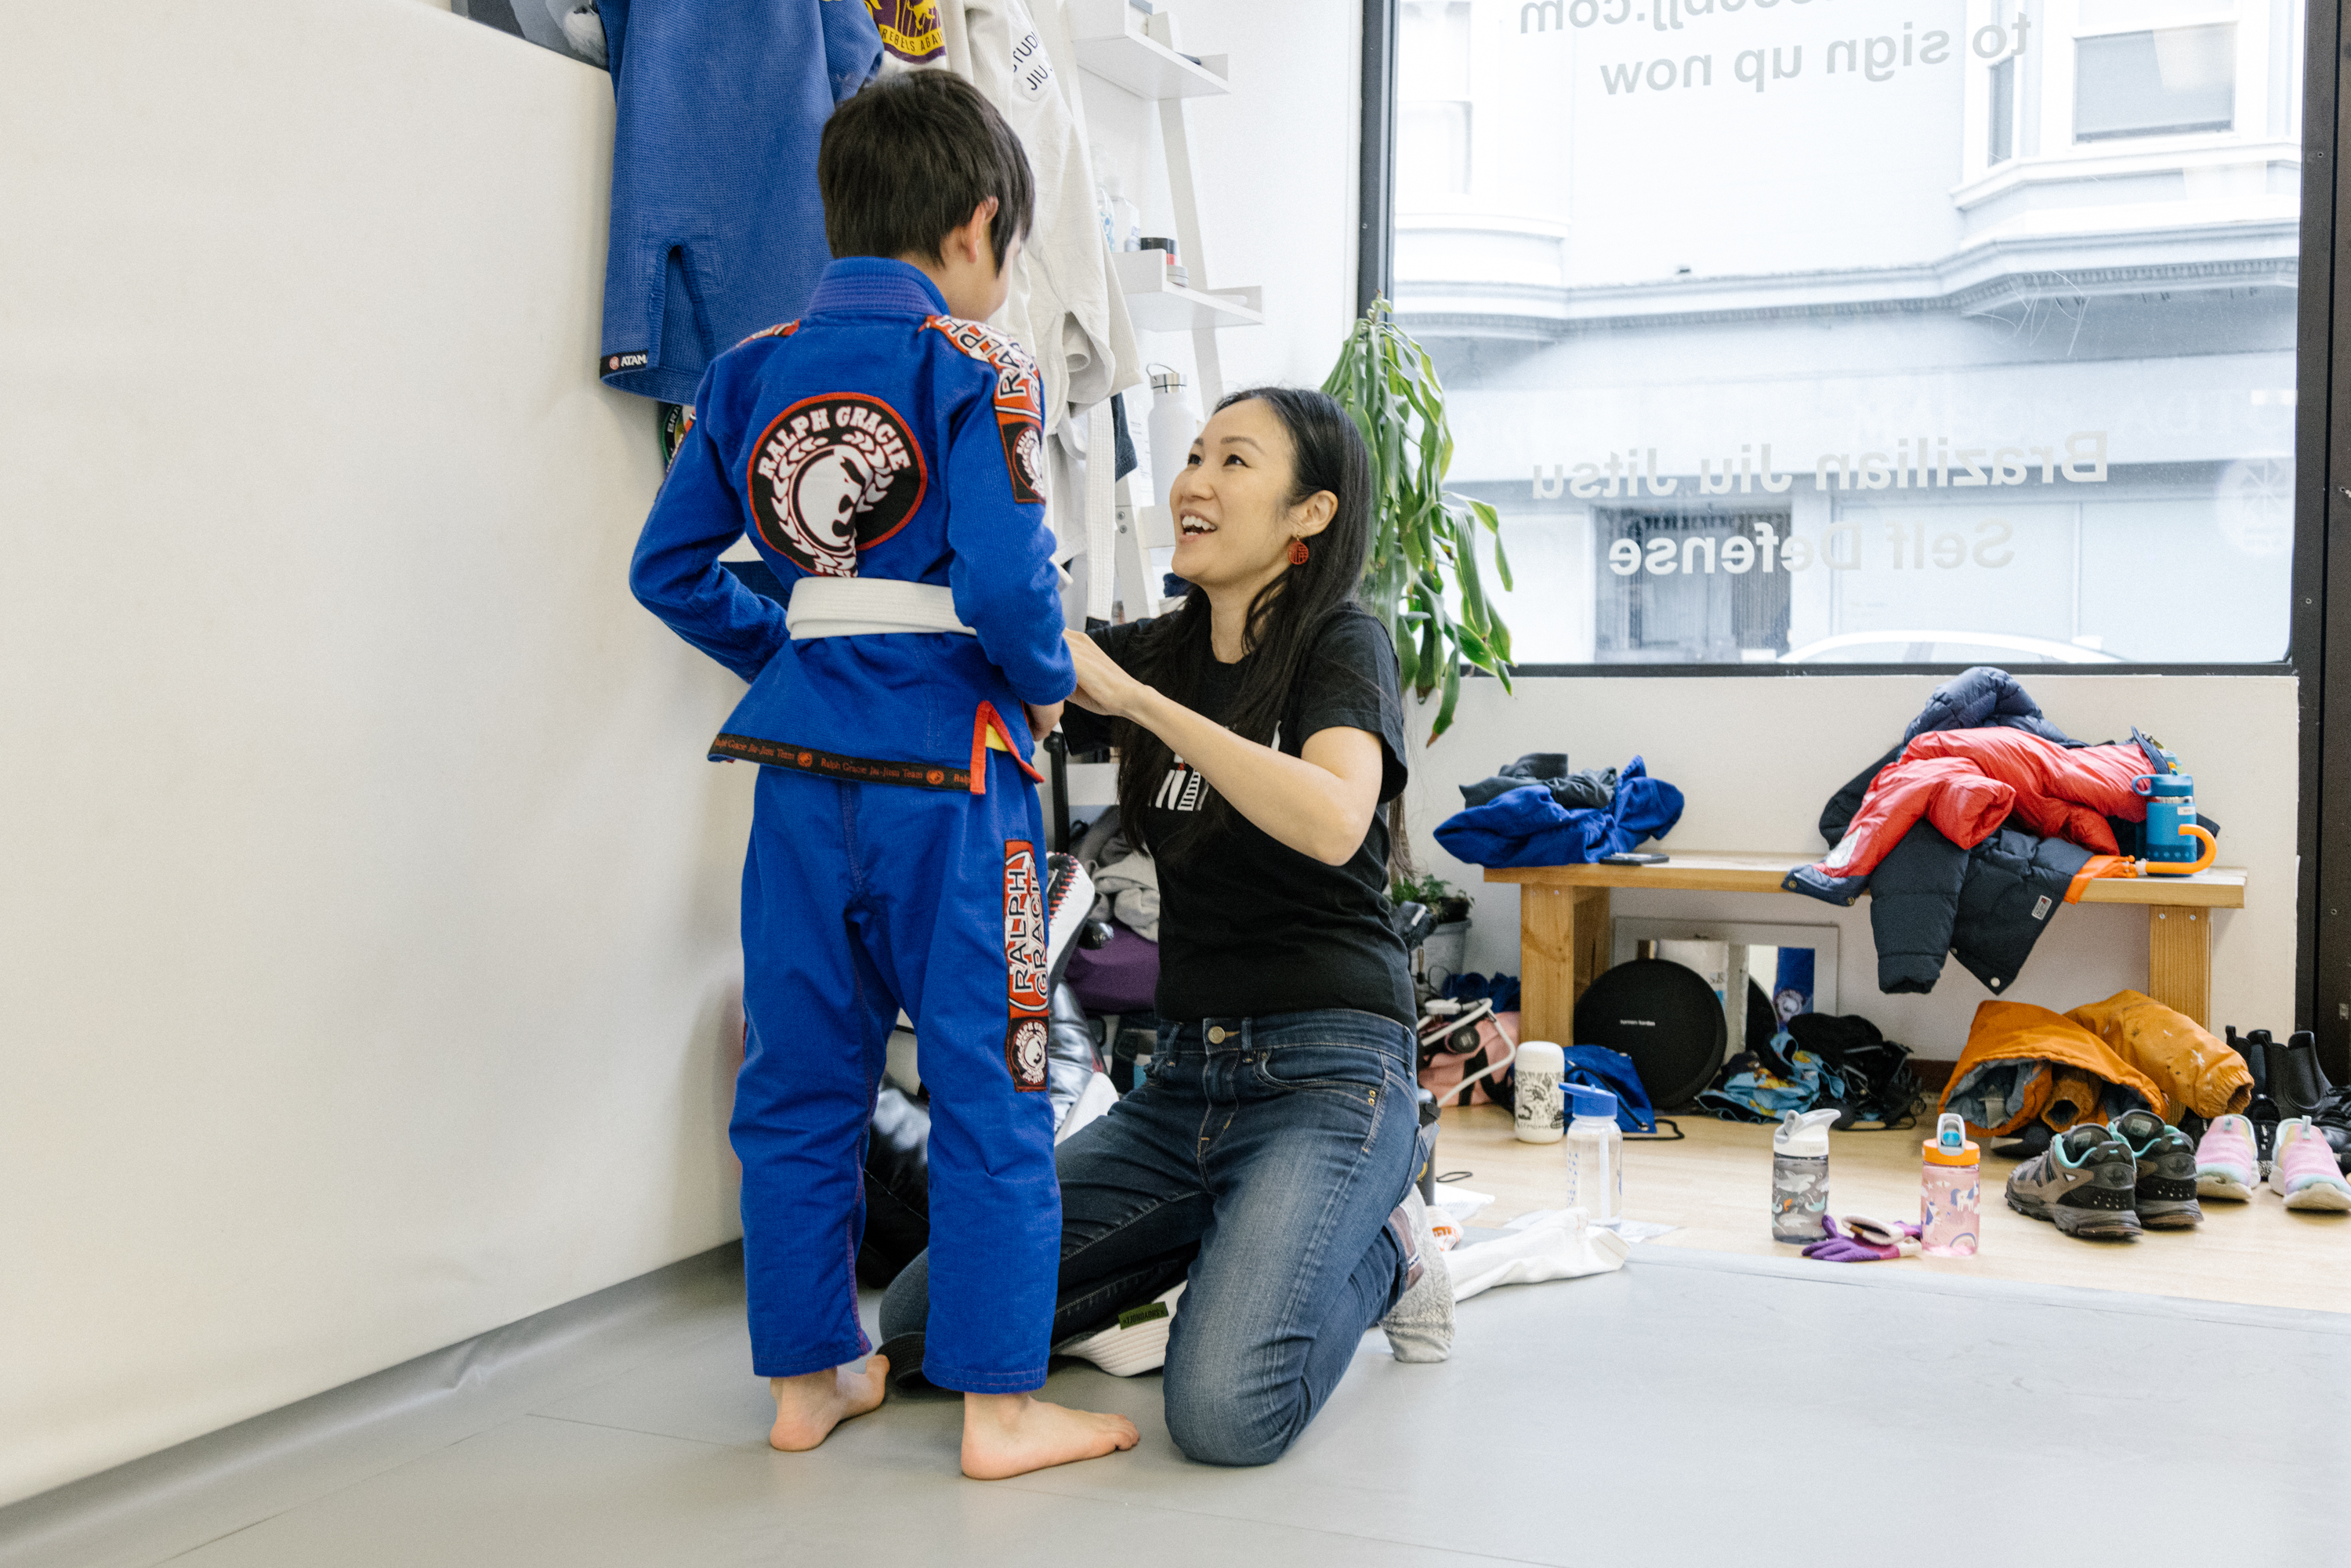 A woman is kneeling, tying the belt of a child in a blue judo uniform, both smiling in a dojo with gear on shelves.